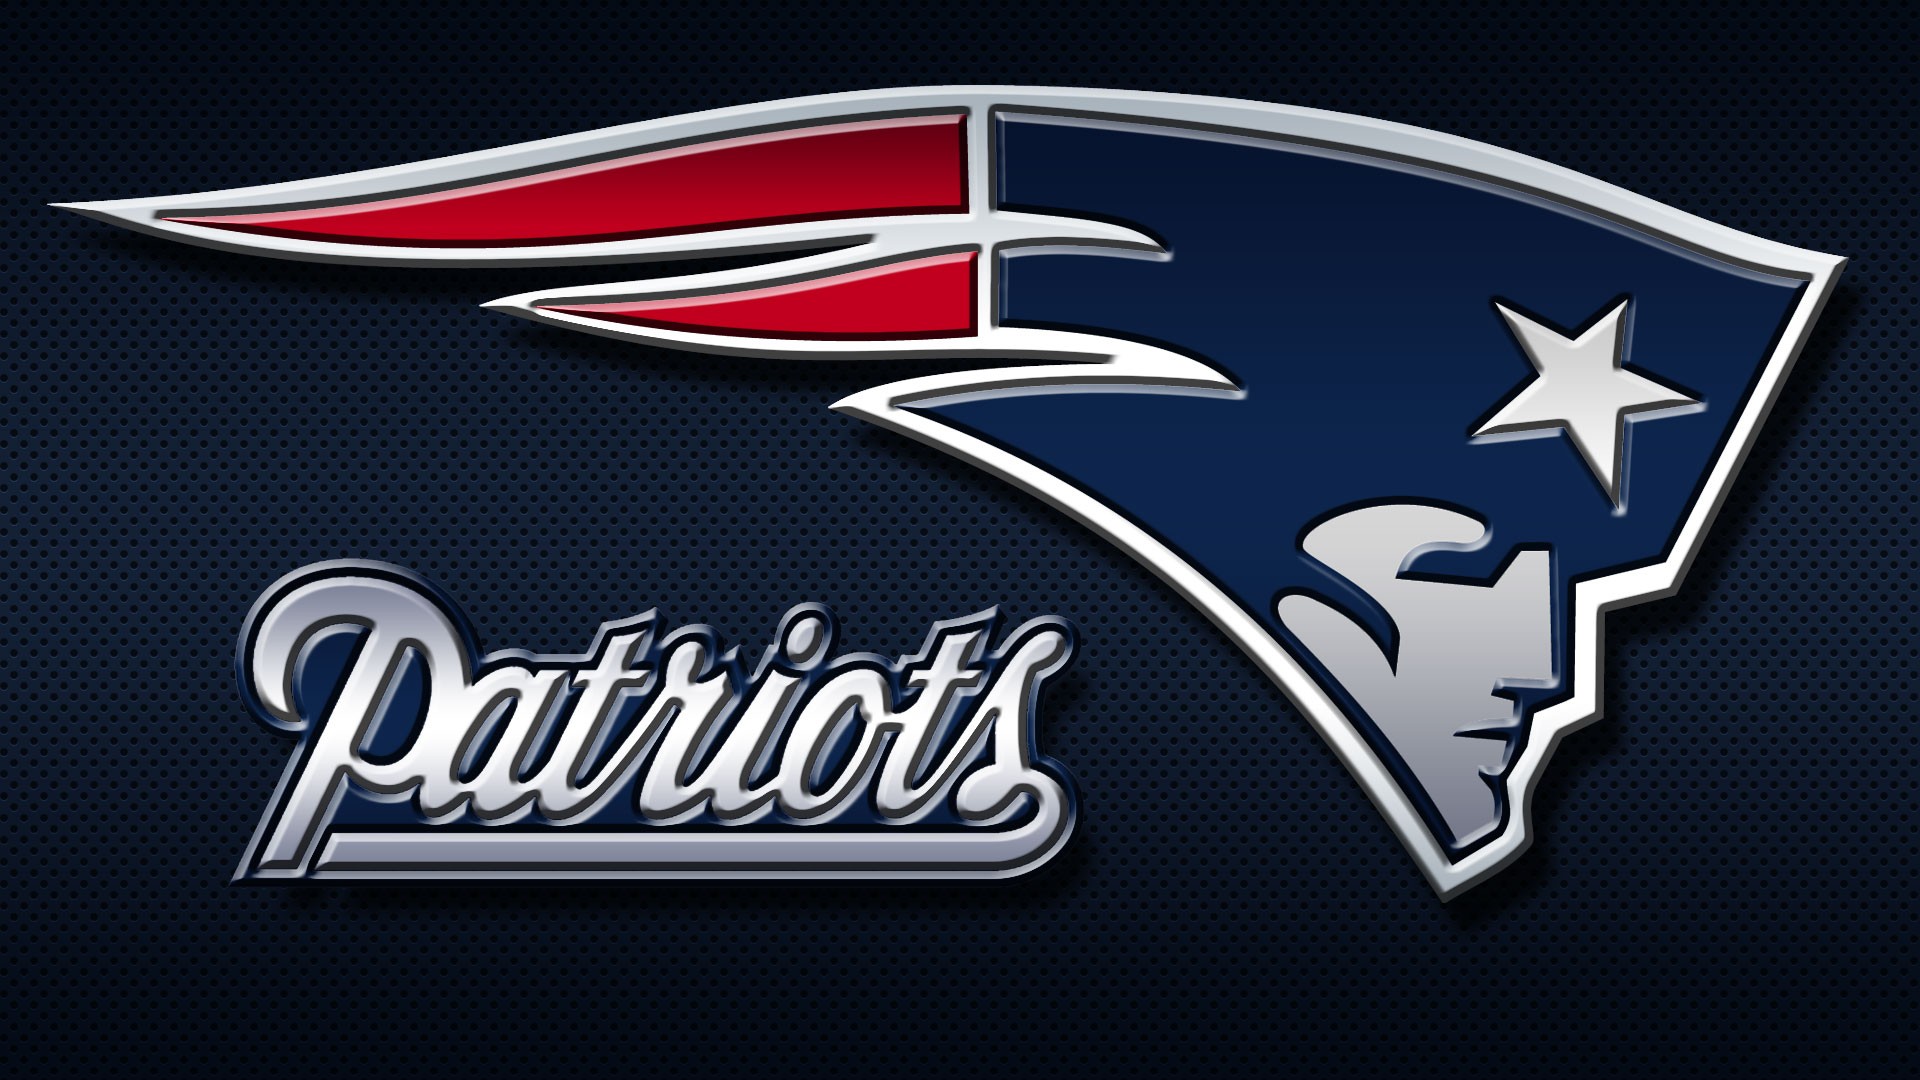 HD New England Patriots Wallpapers with resolution 1920x1080 pixel. You can make this wallpaper for your Mac or Windows Desktop Background, iPhone, Android or Tablet and another Smartphone device